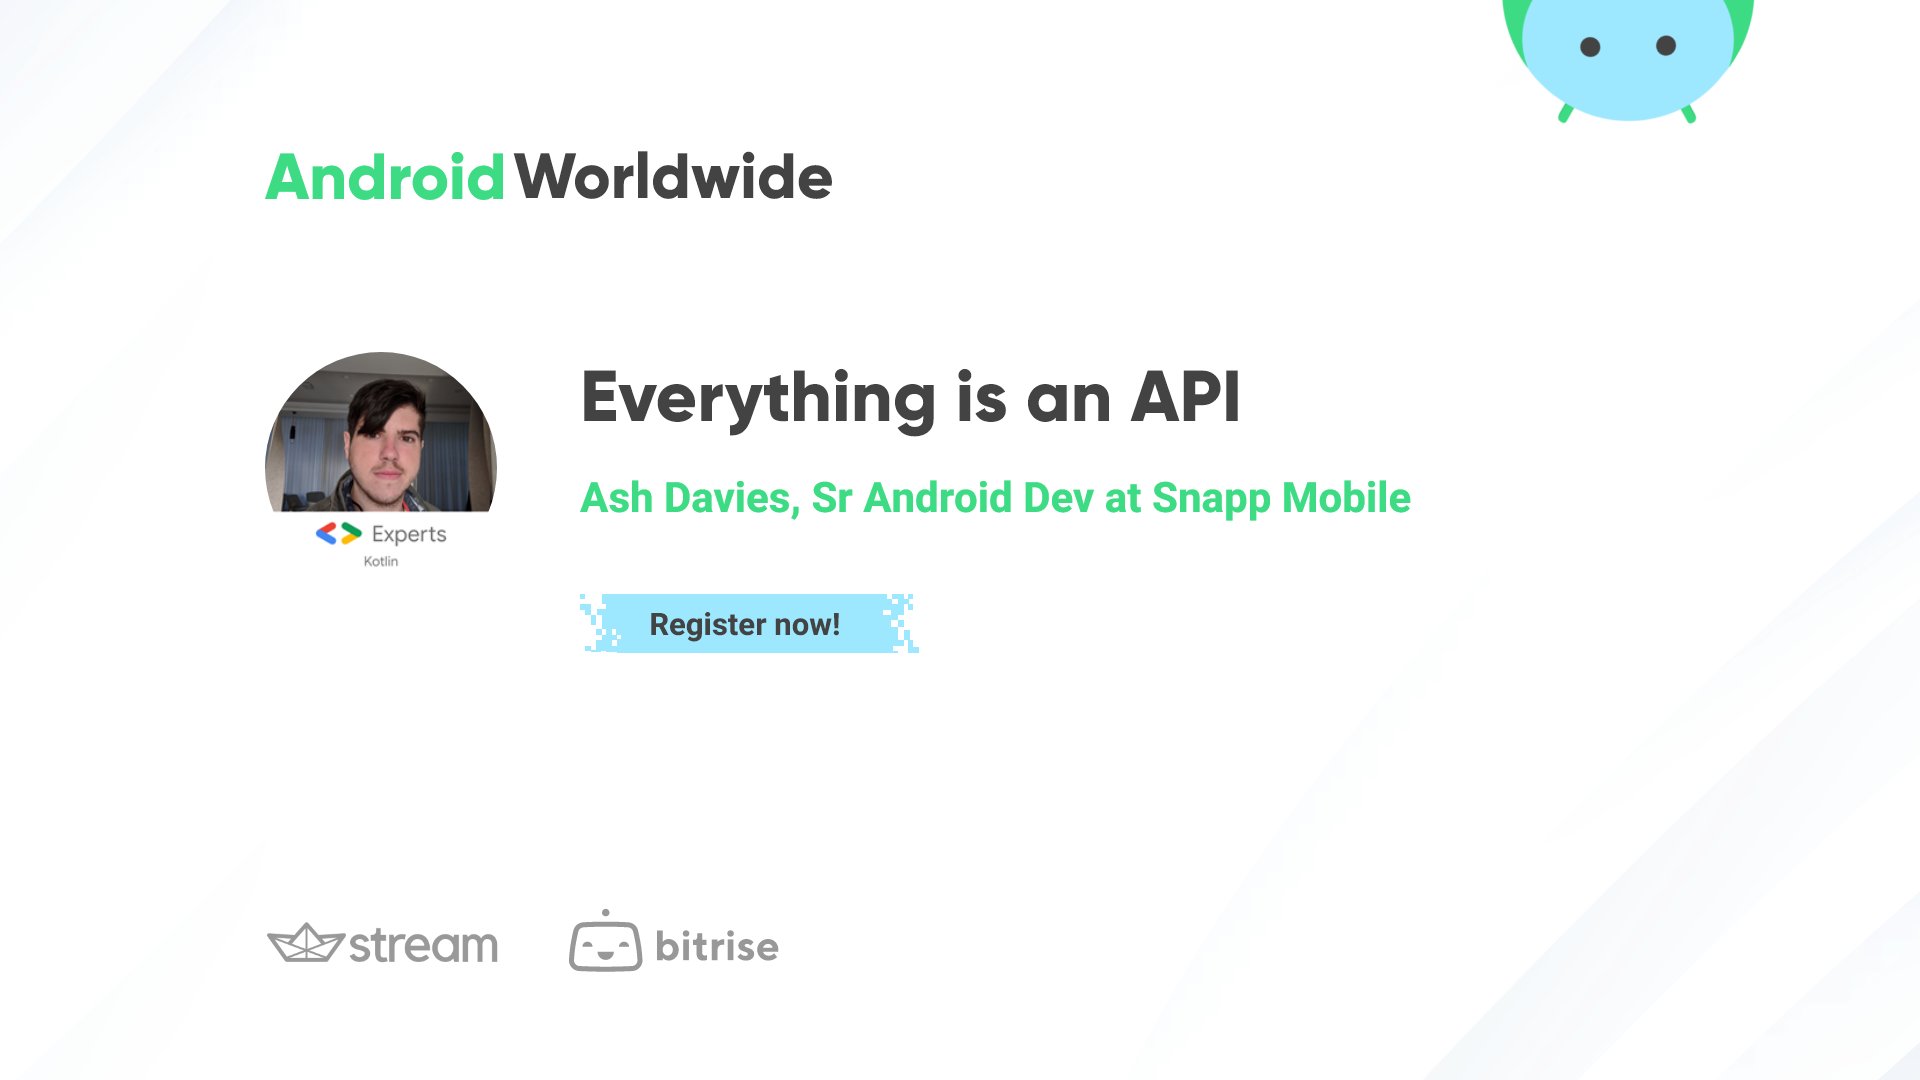 Android Worldwide: Everything is an API